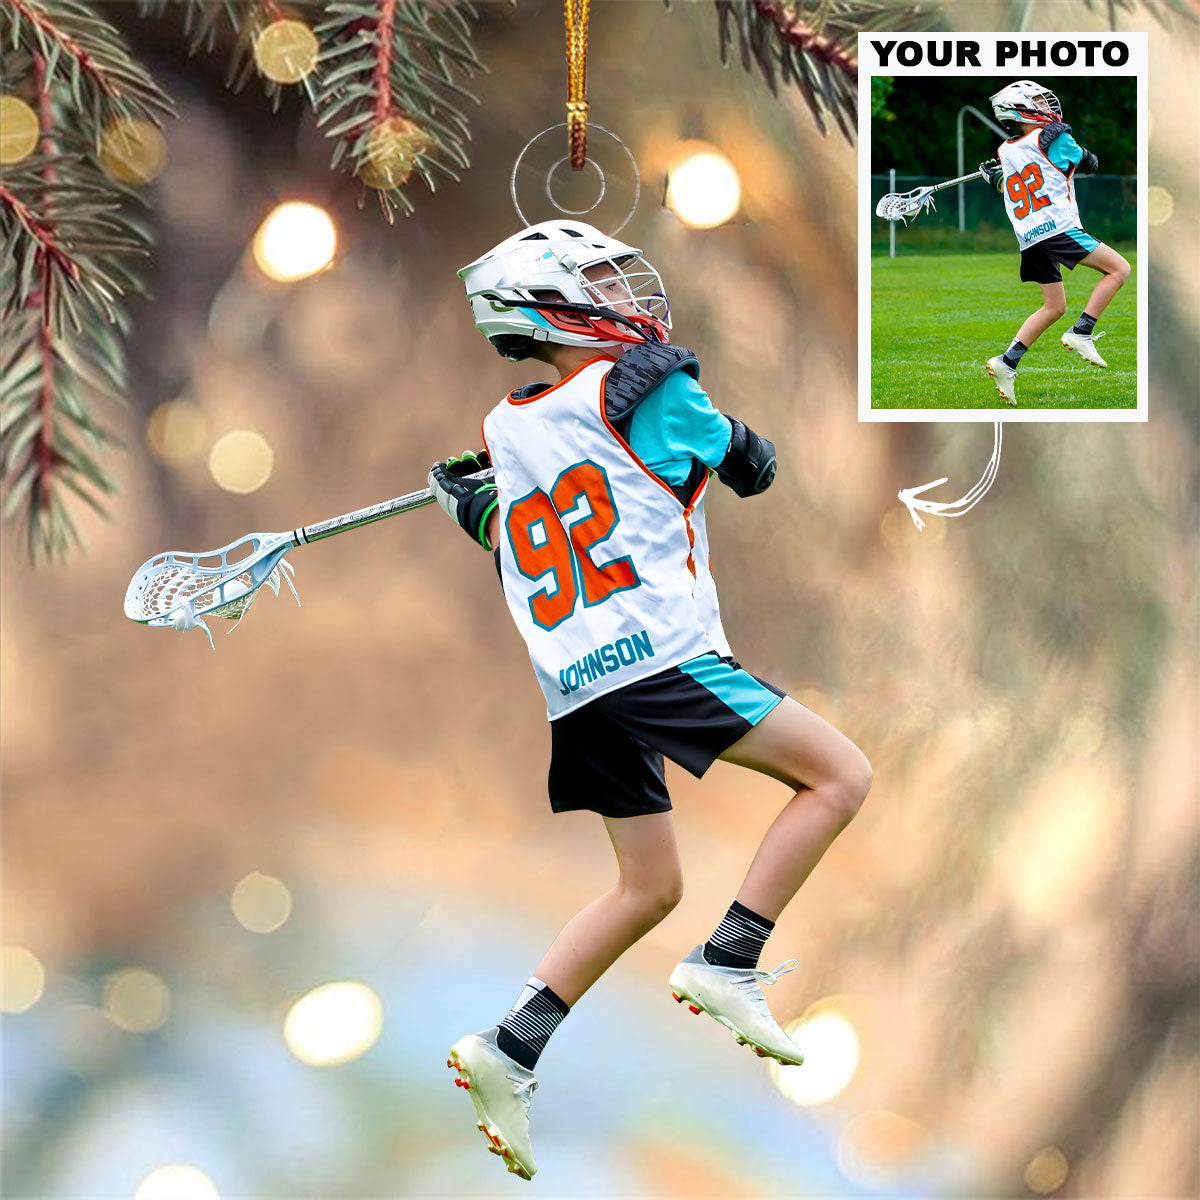 Kid Lacrosse Ornament - Personalized Custom Photo Mica Ornament - Christmas Gift For Kids, Sport Lovers, Family Members